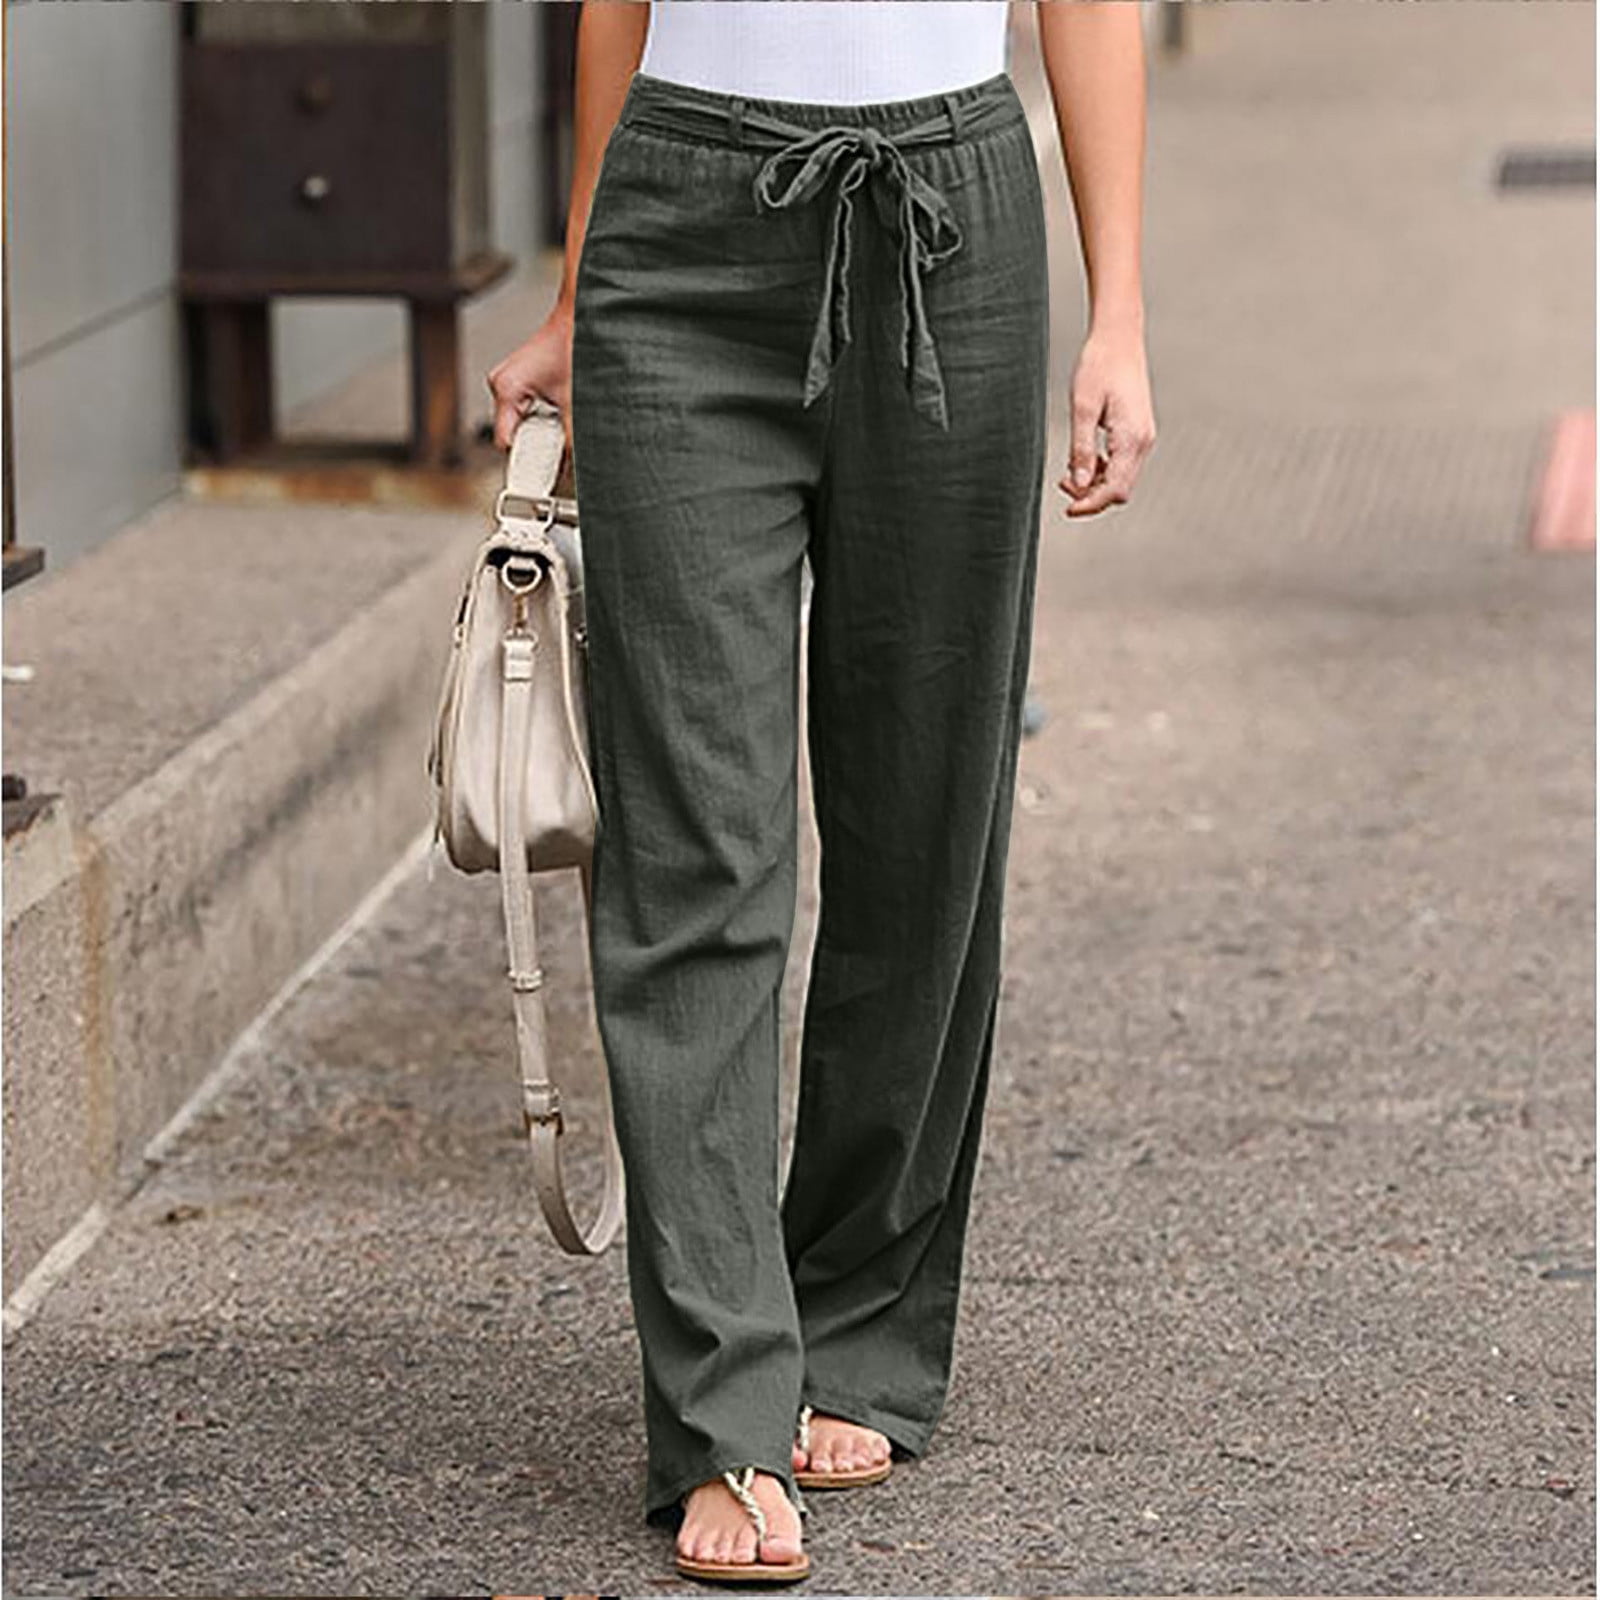 The 9 Best Linen Pants to Rock All Summer (2020) - Casual, Cool & Chic